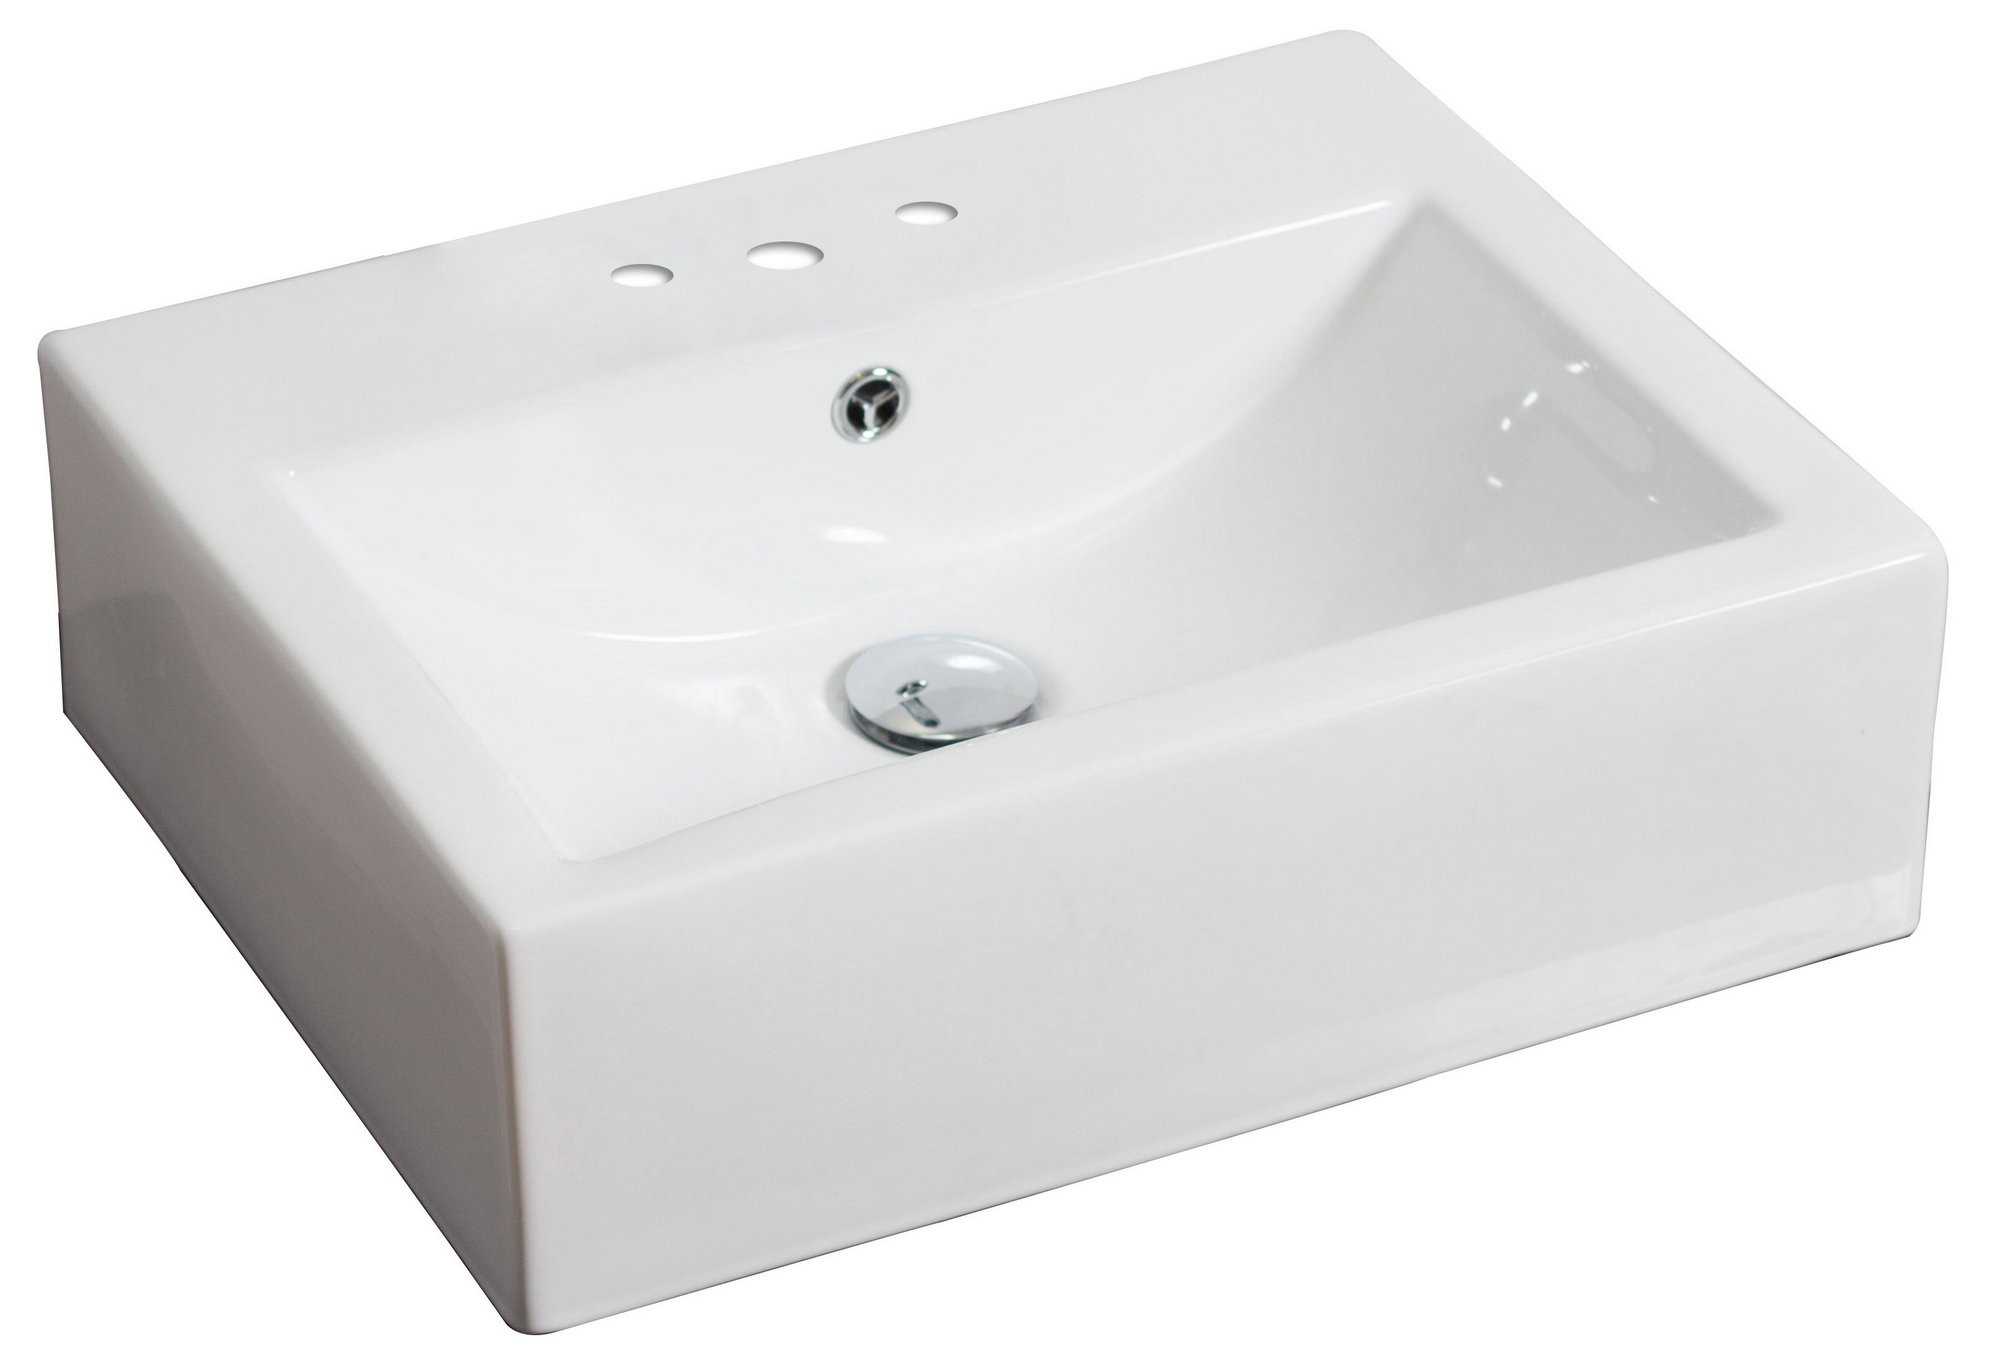 American Imagination AI-593 Above Counter Vessel Sink In White For 4-in. o.c. Faucet